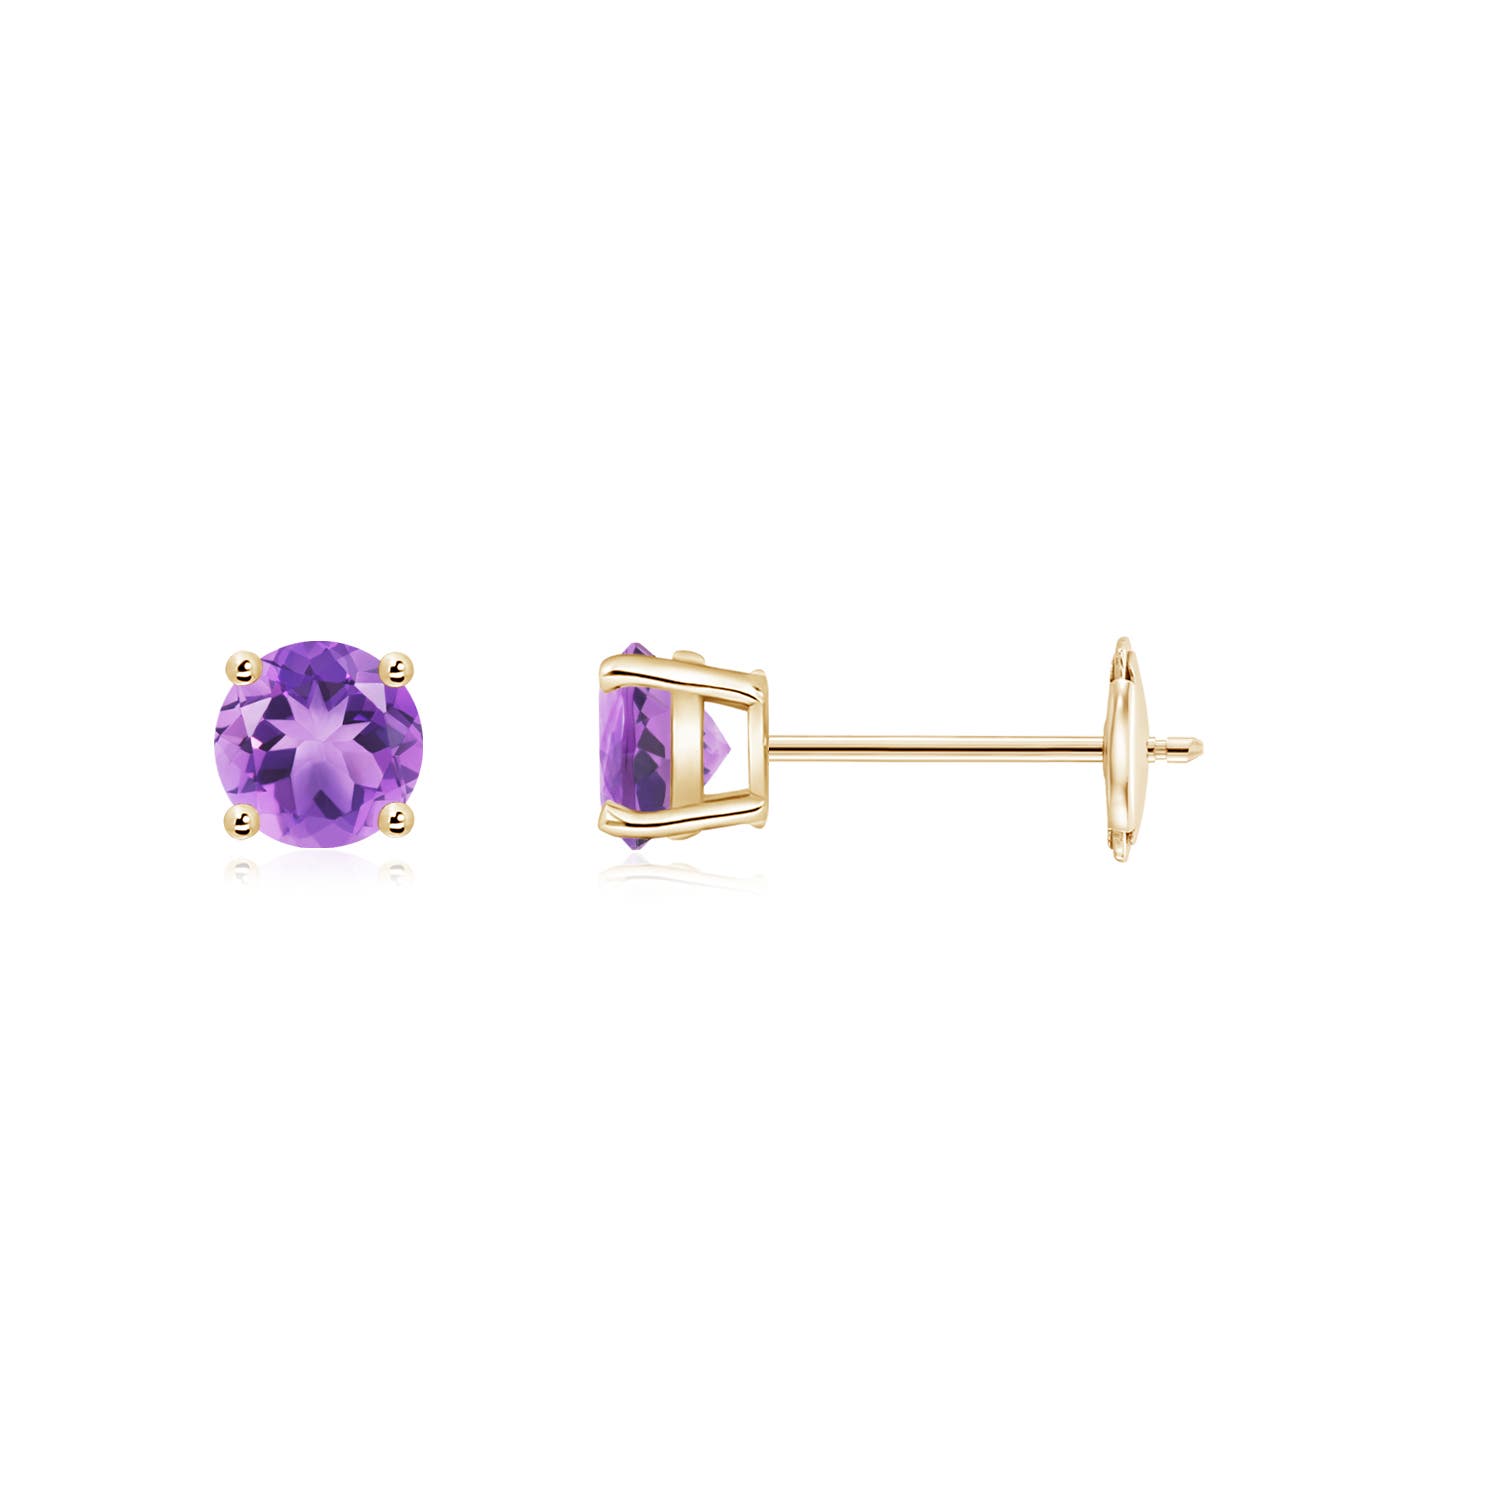 A - Amethyst / 0.5 CT / 14 KT Yellow Gold